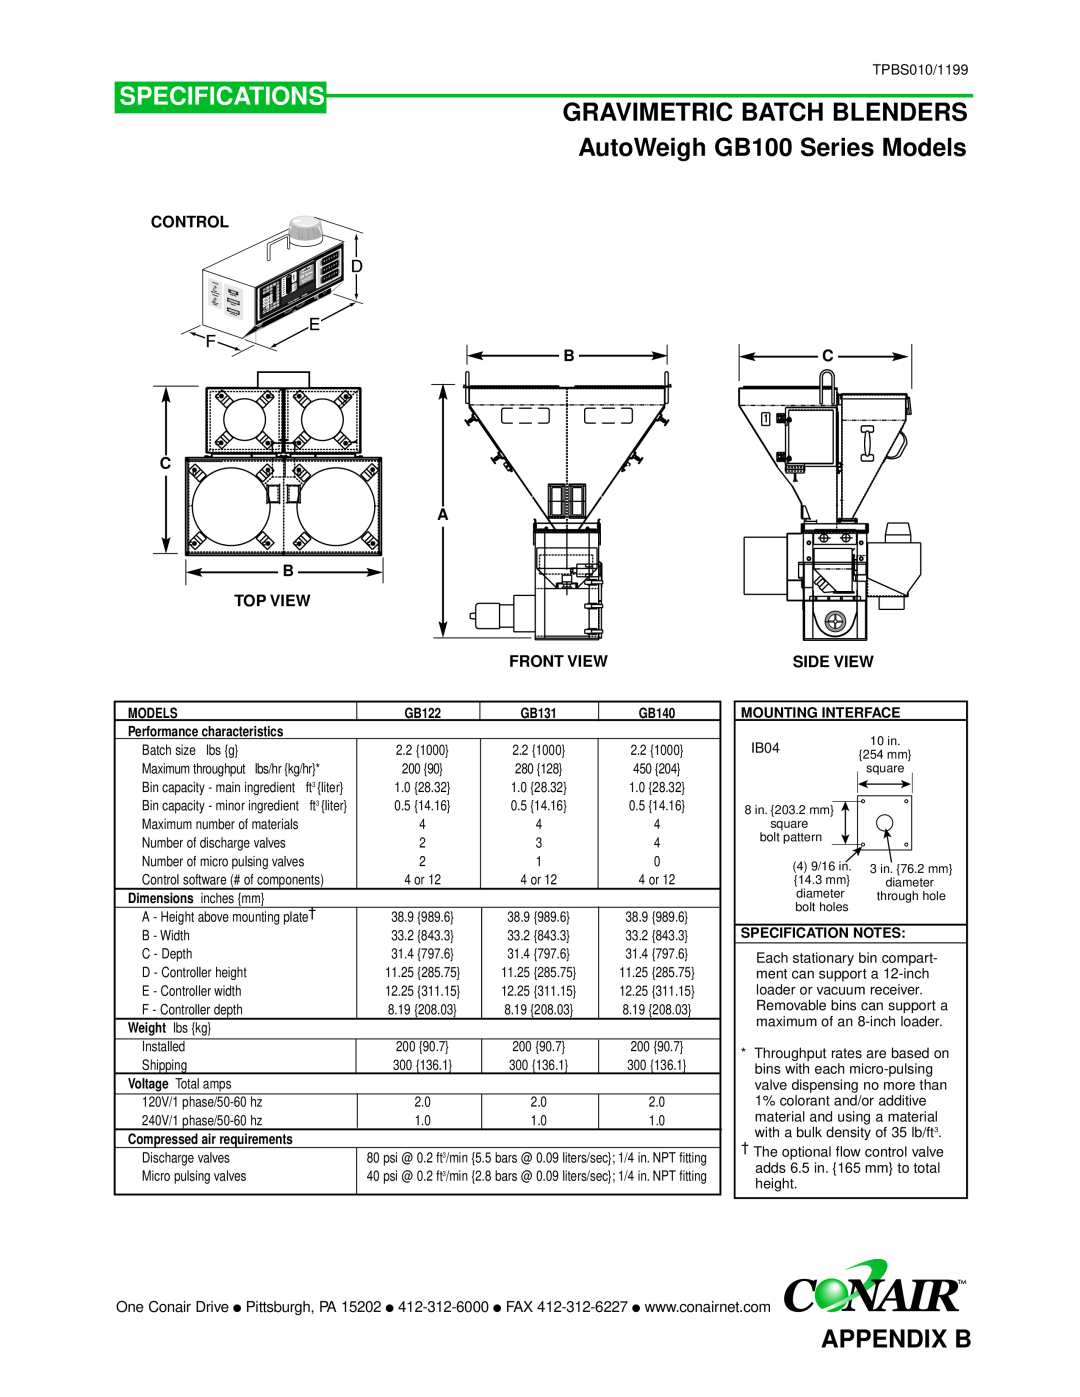 Conair GB/ WSB manual Specifications, Appendix B, Control, B C A B Top View, Front View, Side View 